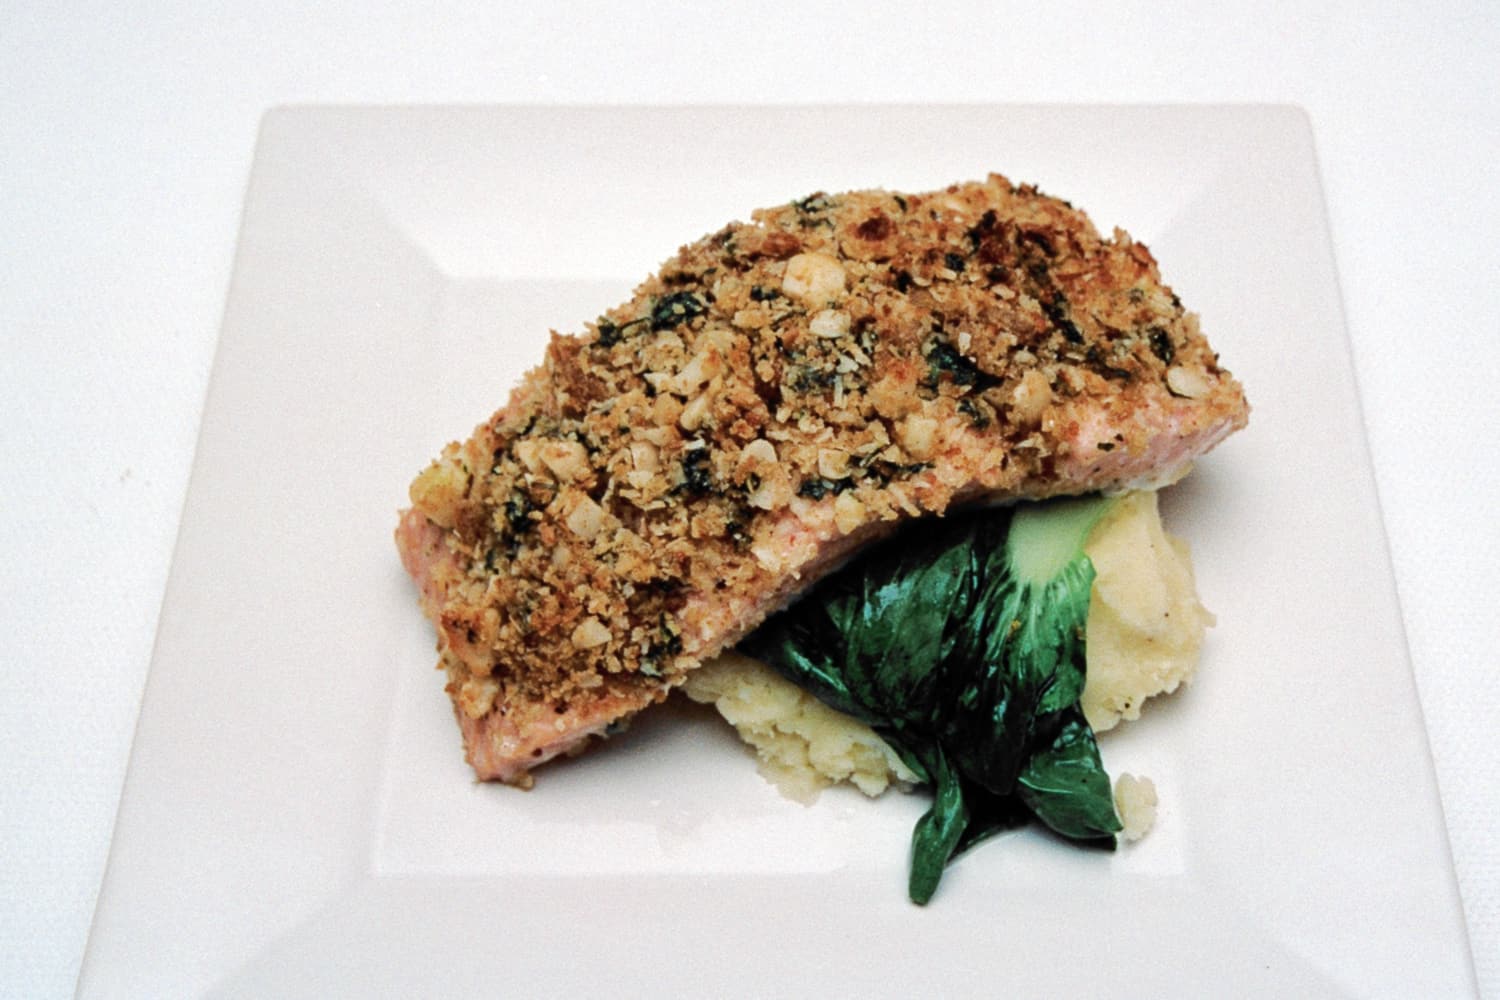 Macadamia and Coconut Crusted Salmon Fillets on Pak Choi and Mash